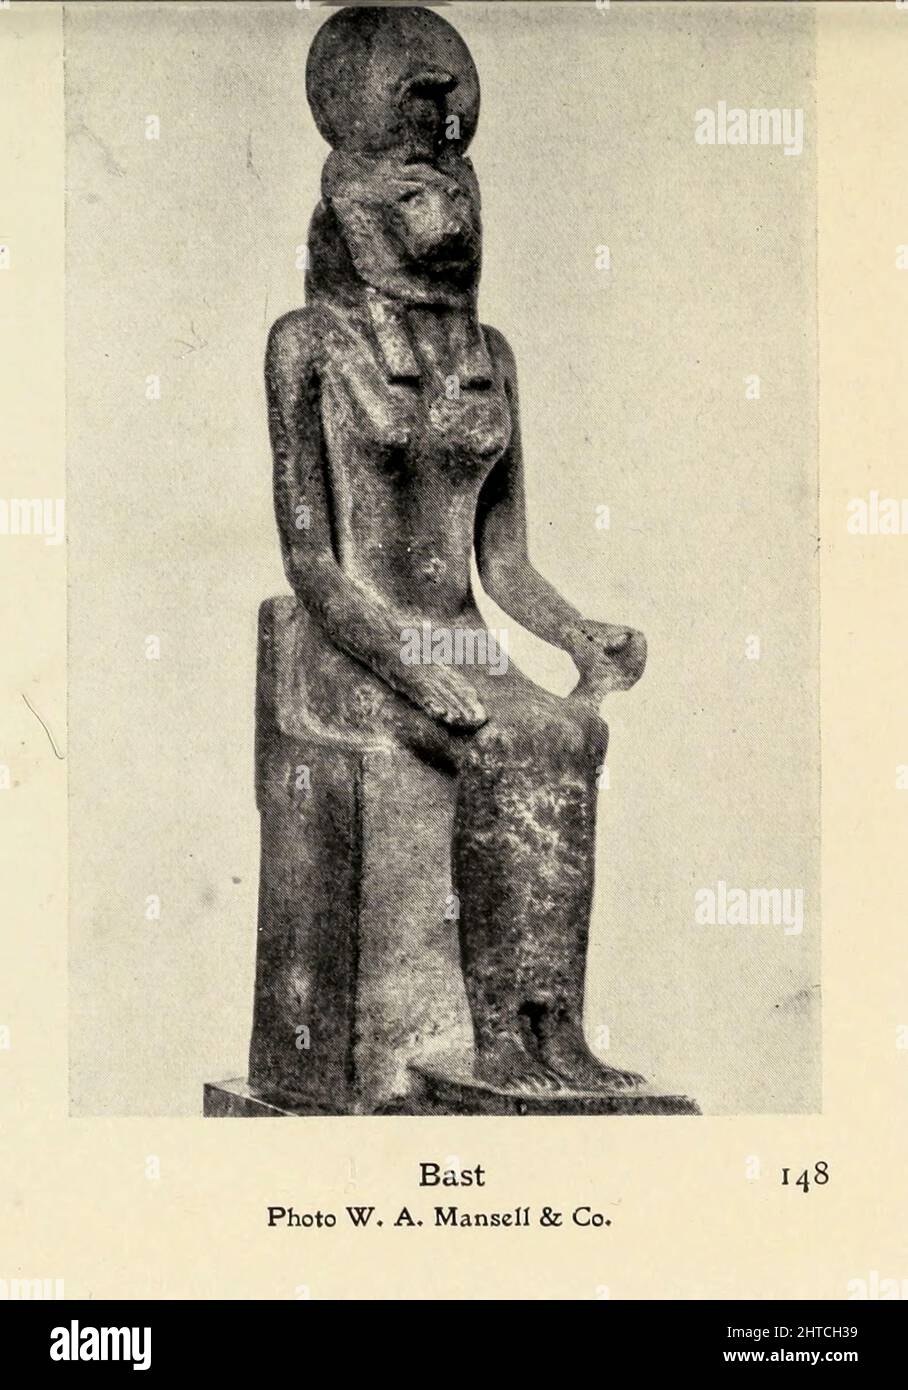 Bast From the book '  Myths and legends : ancient Egypt ' by Lewis Spence, Published Boston : D.D. Nickerson 1910 Stock Photo